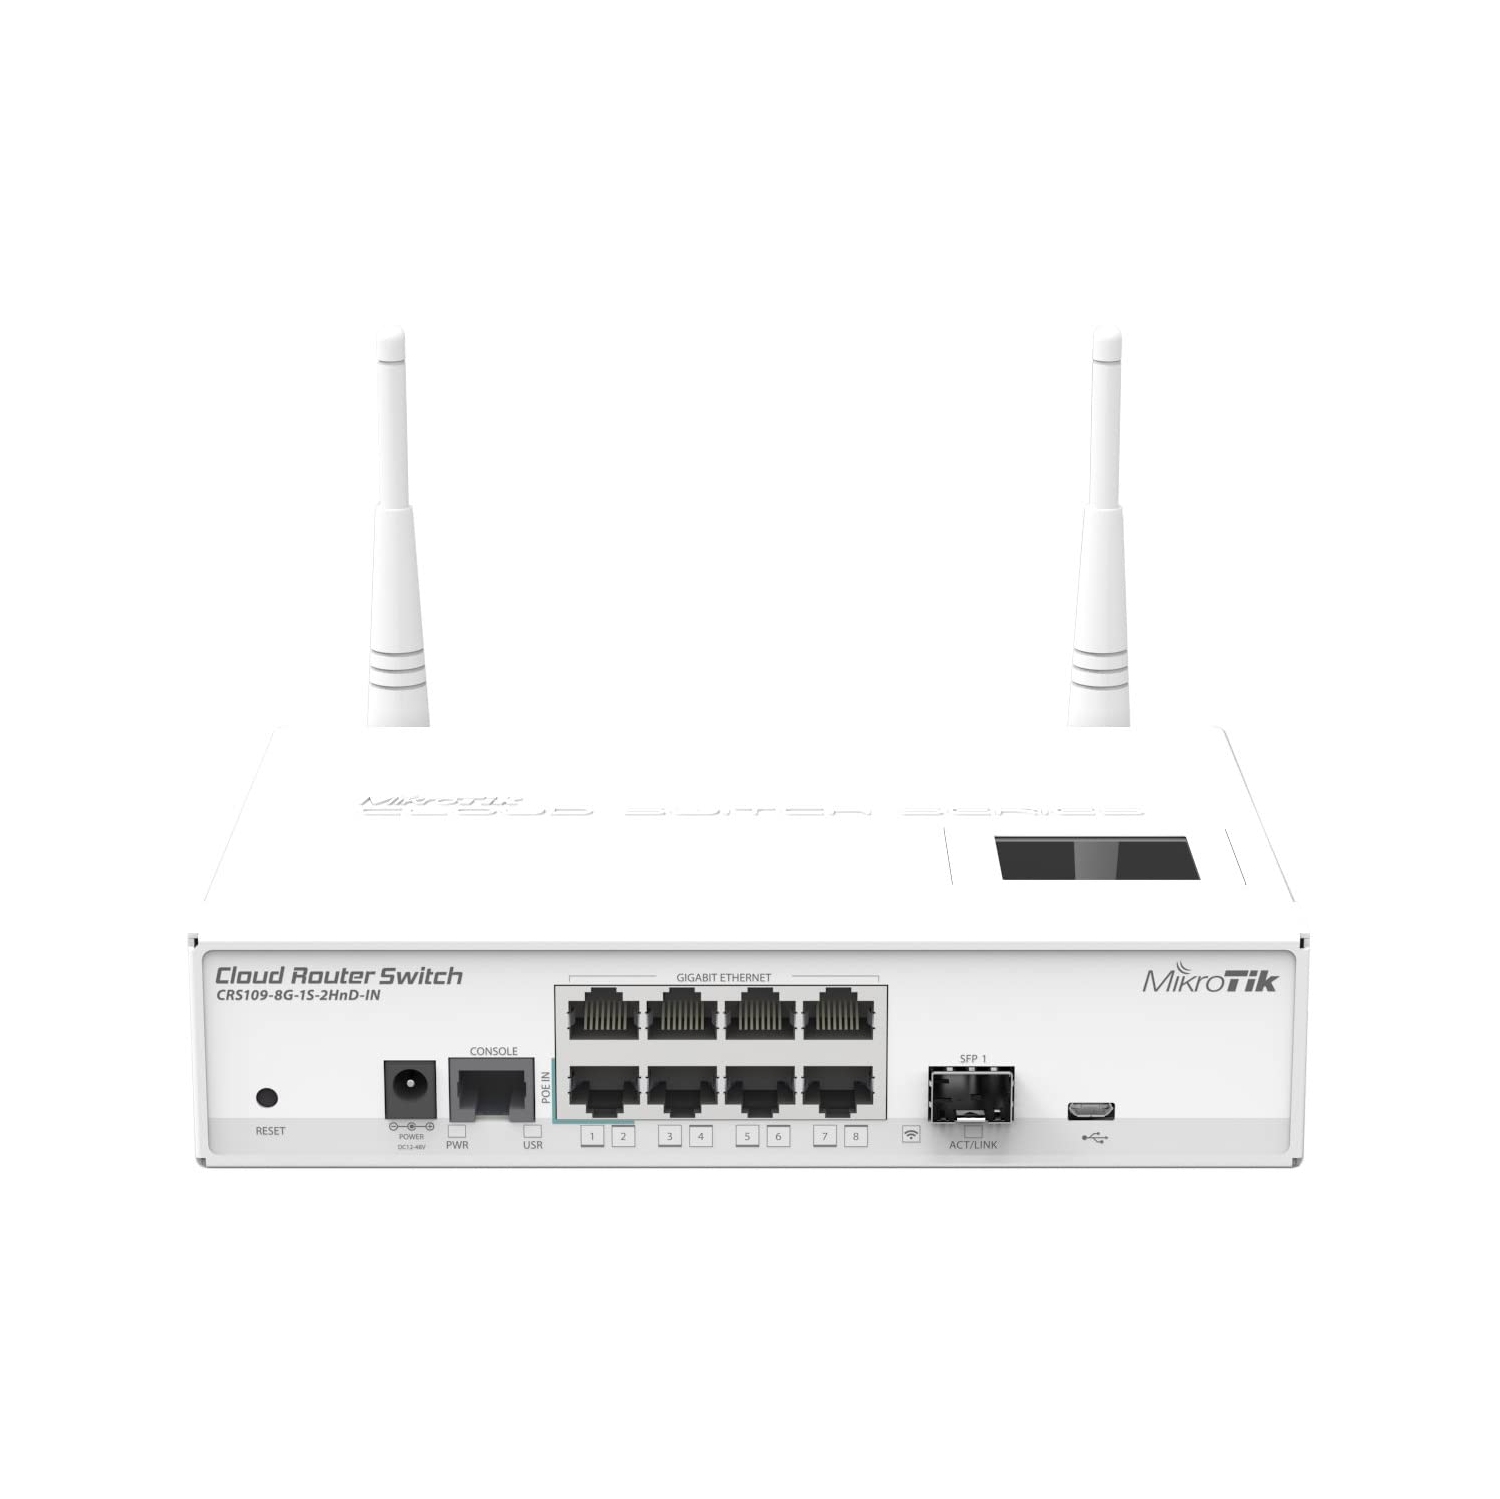 MikroTik Cloud Router Switch CRS109-8G-1S-2HnD-IN by Mikrotik